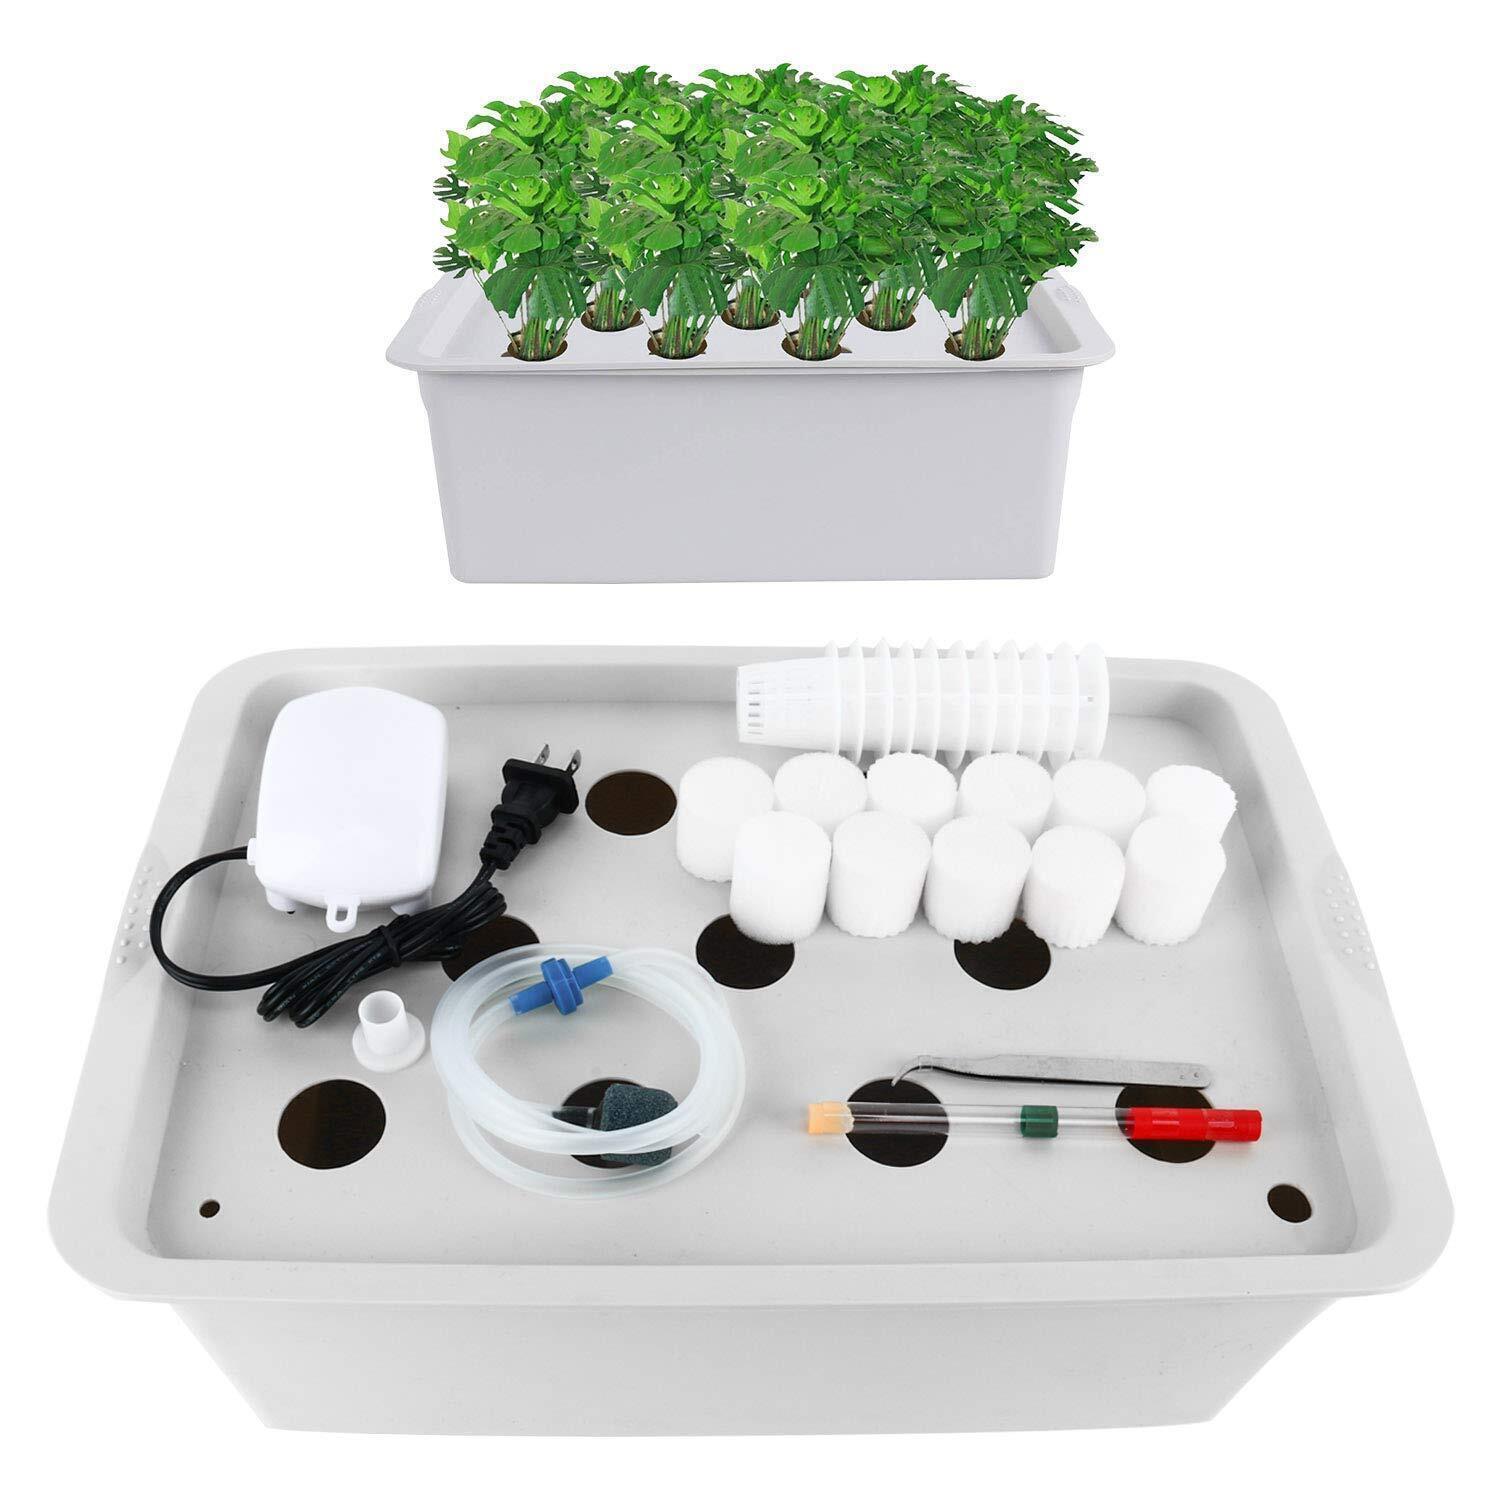 Homend 11 Sites Indoor Hydroponic Grow Kit with Bubble Stone for Herb Garden